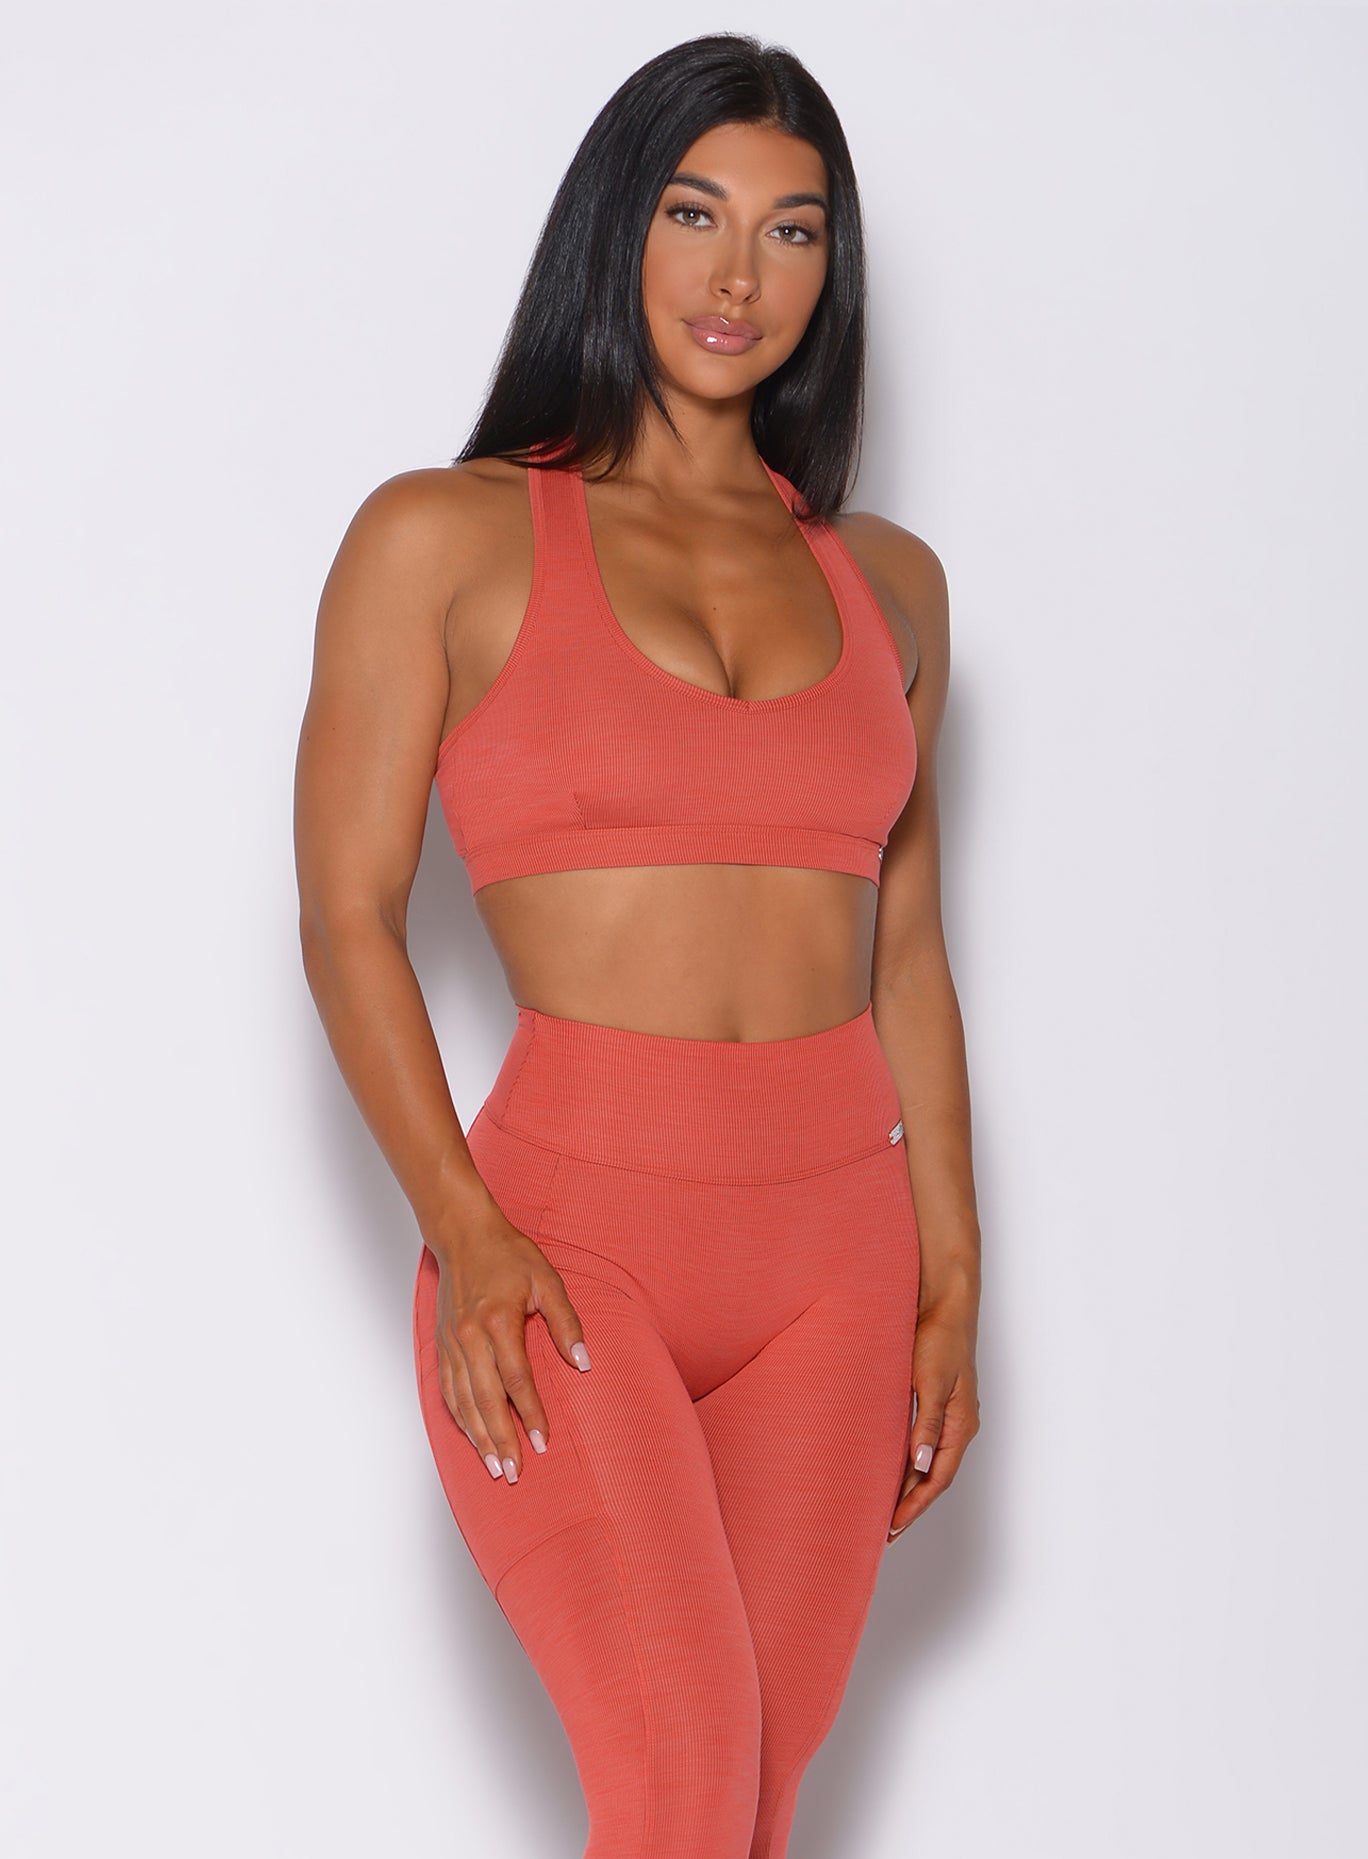 Right side profile view of a model wearing our power rib sports bra in burnt orange color and a matching high rise leggings